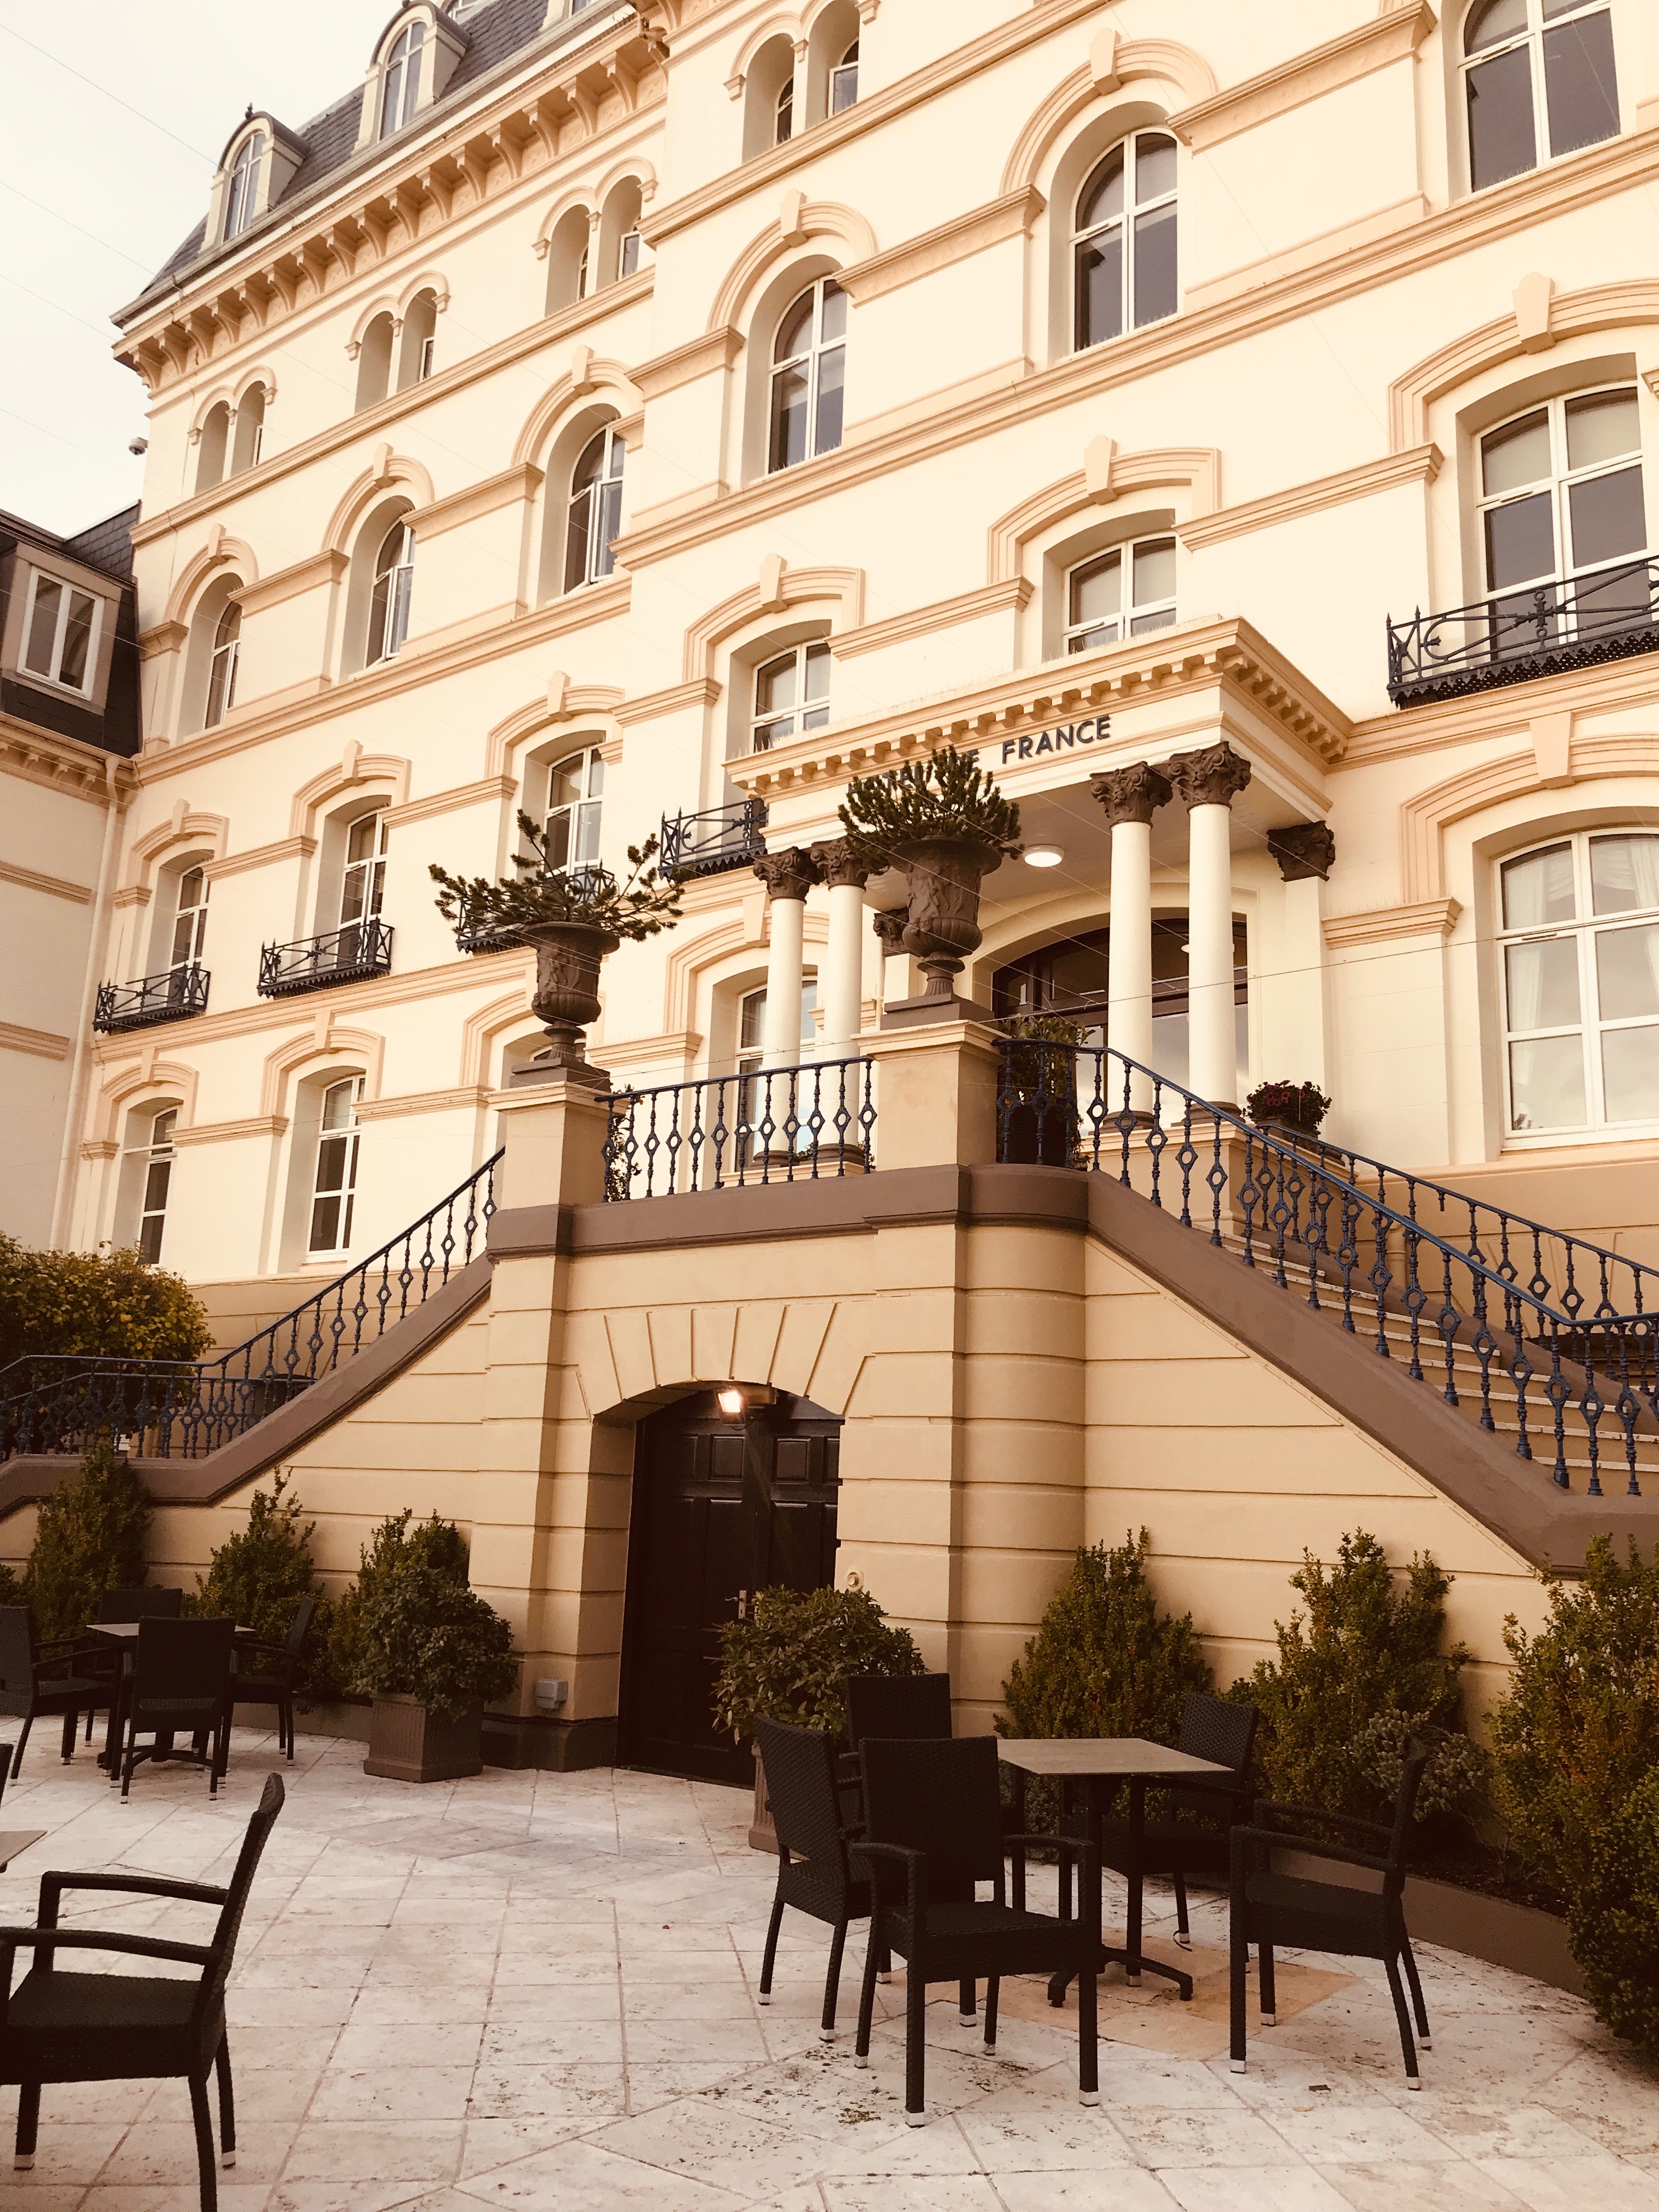 French Chateau style architecture of the Hotel de France